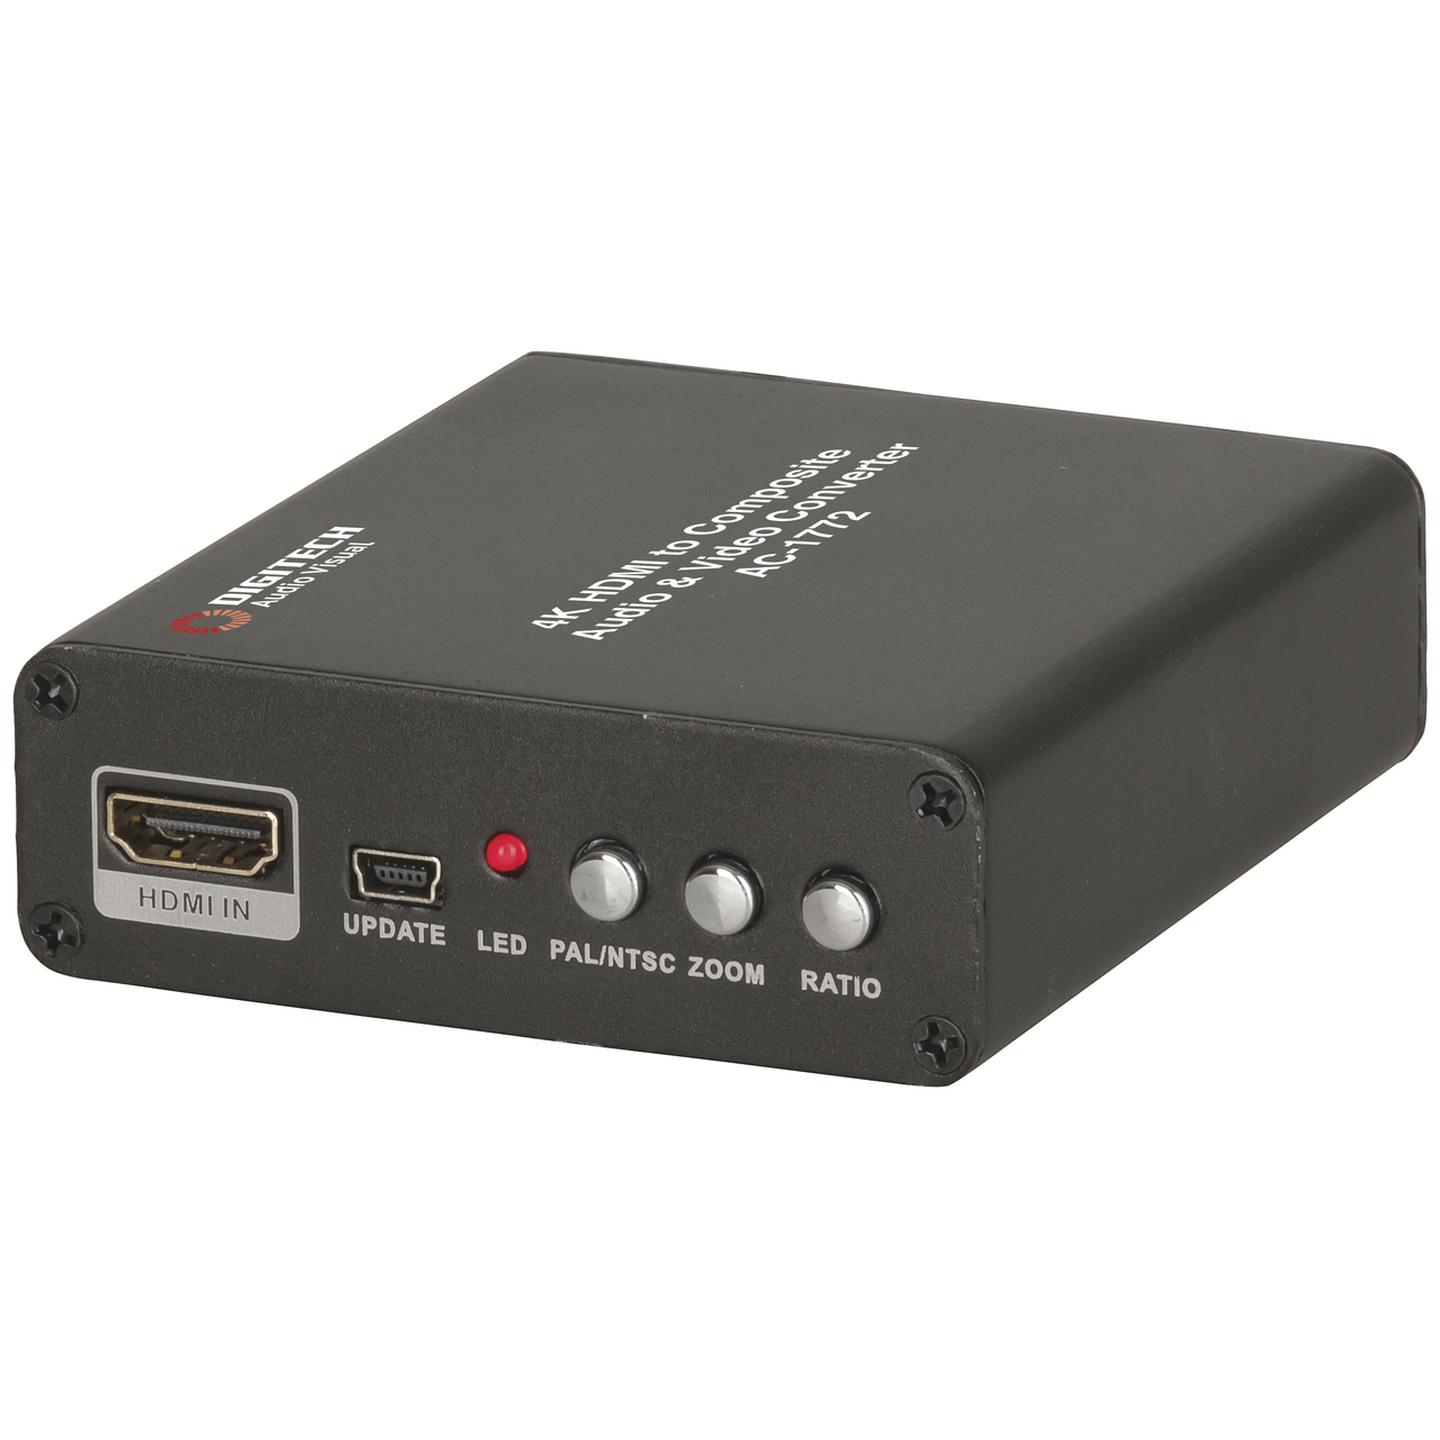 4K HDMI to Composite Audio and Video Converter